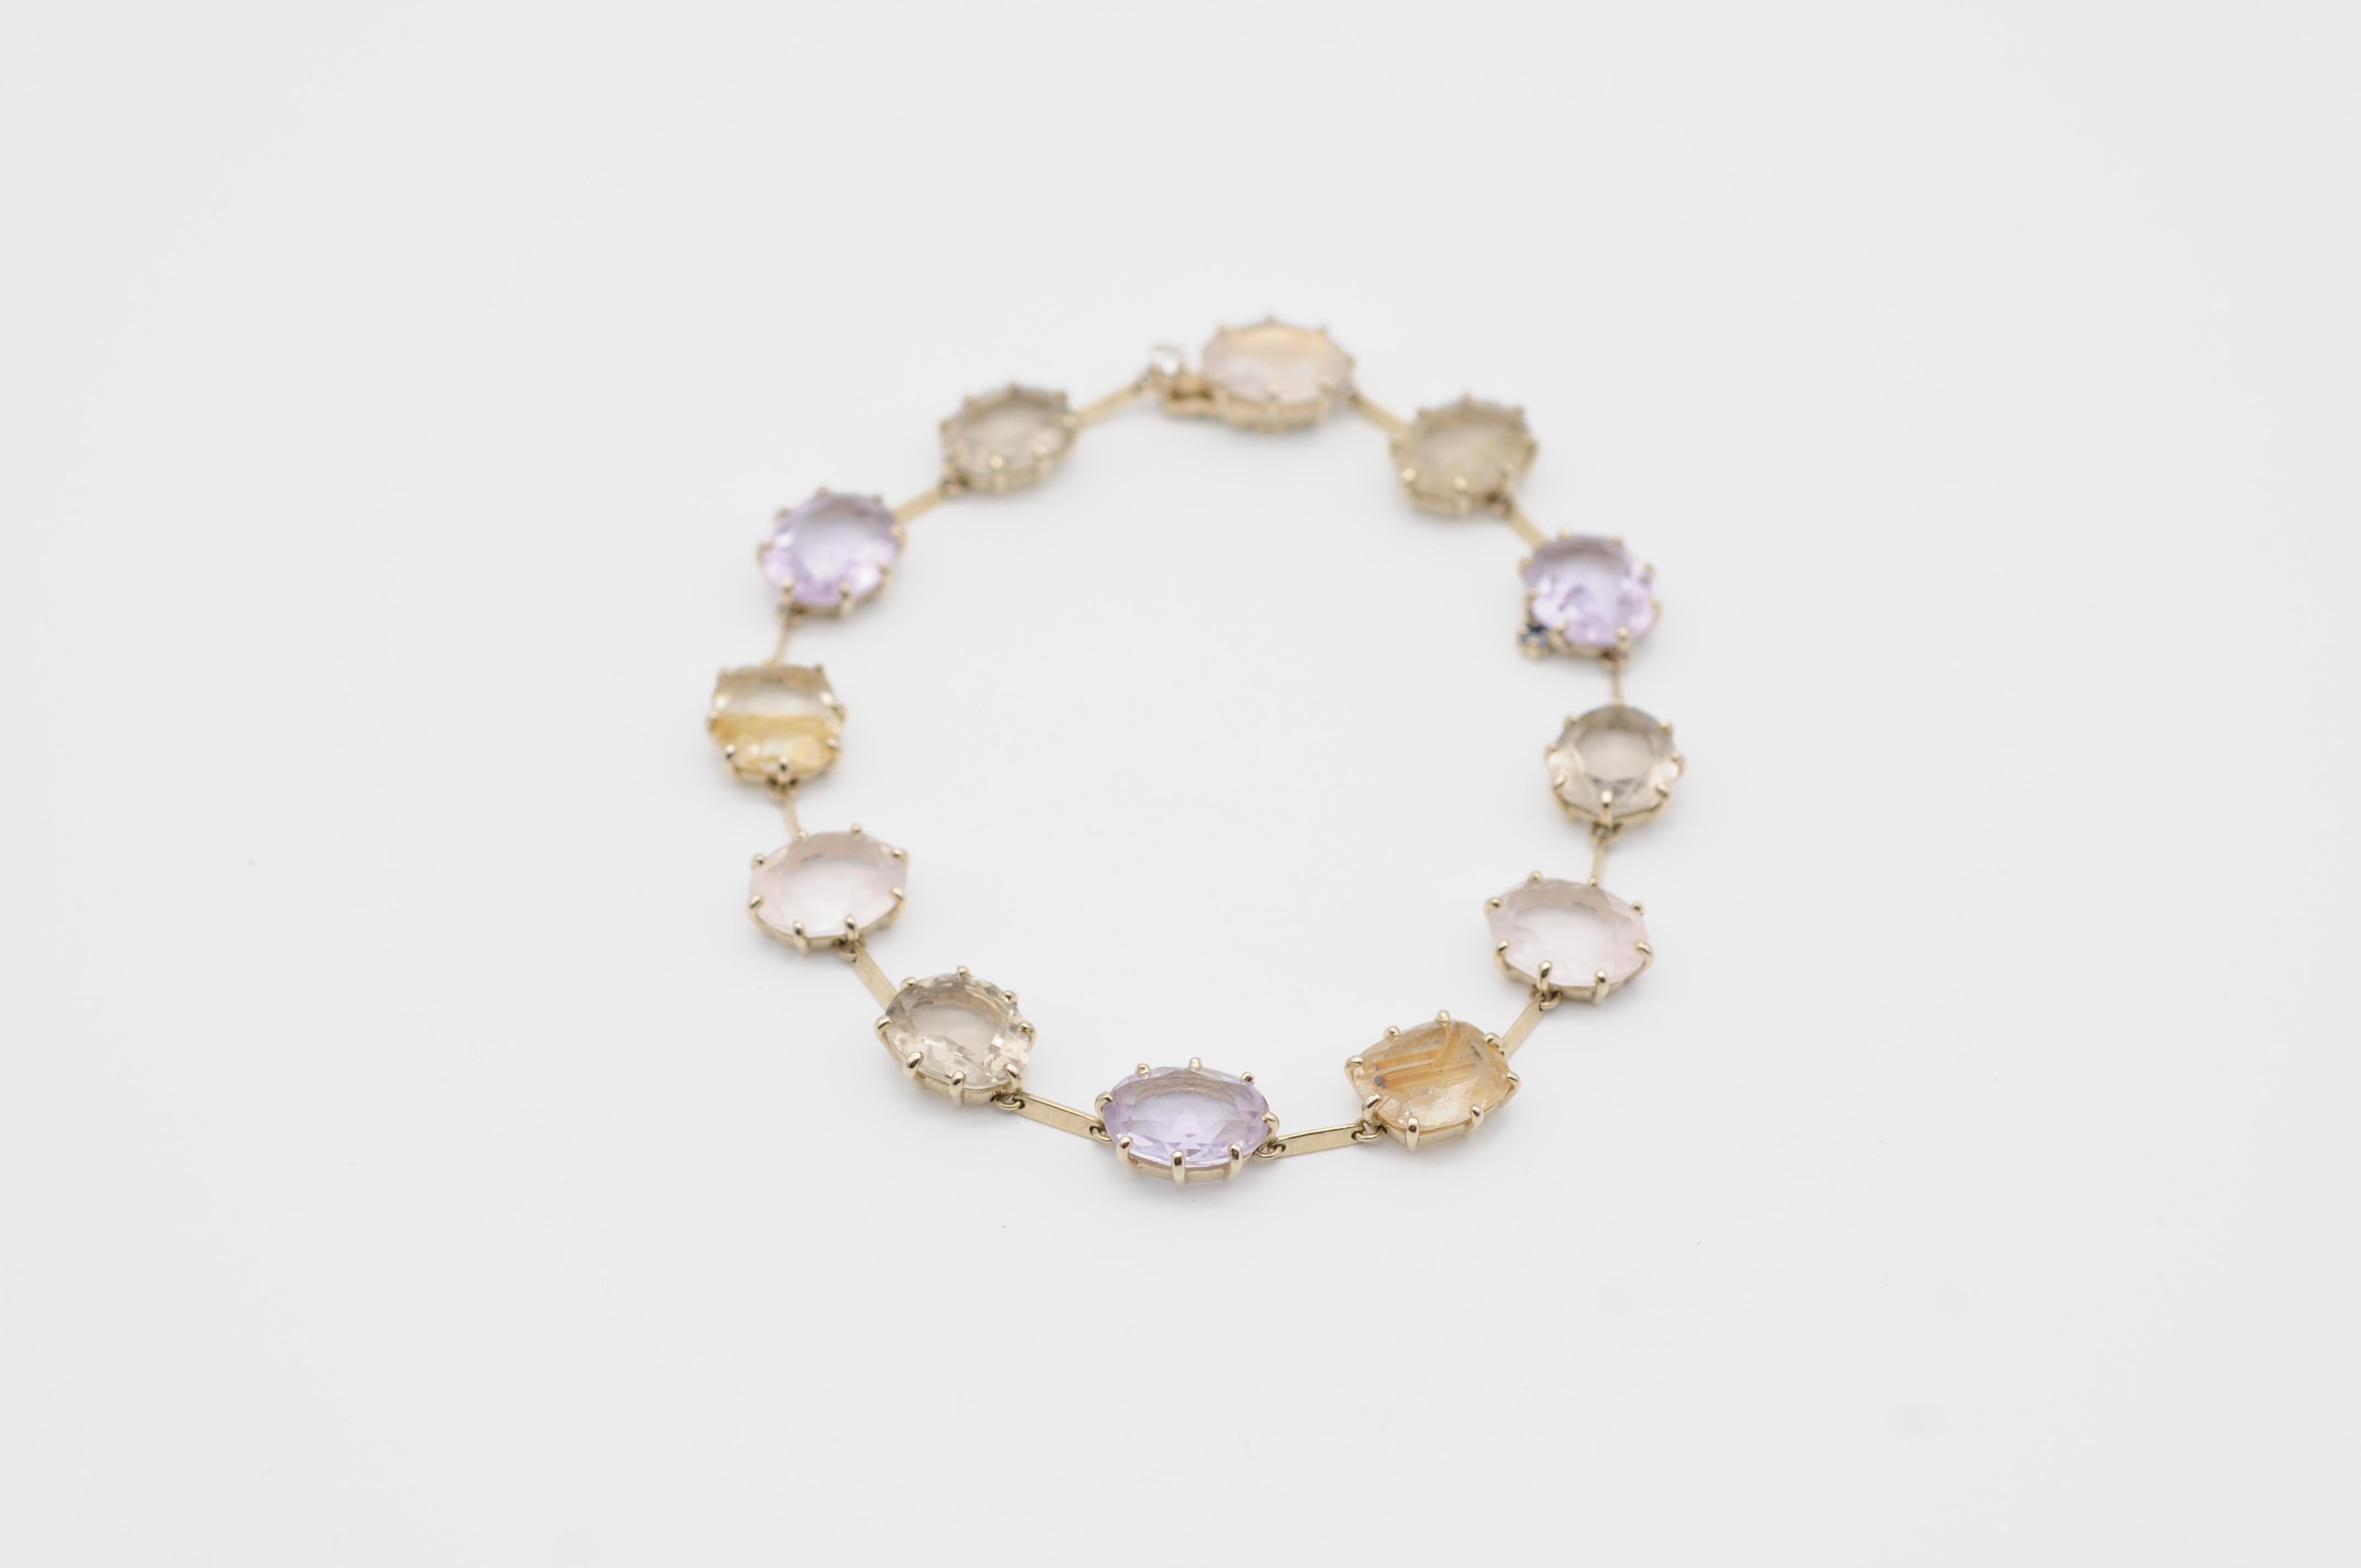 Indulge yourself in the exquisite beauty of this modern bracelet, a stunning piece of artistry that radiates charm and elegance. Crafted from 18K yellow gold, this bracelet features irregularly shaped semiprecious stones that include citrine,